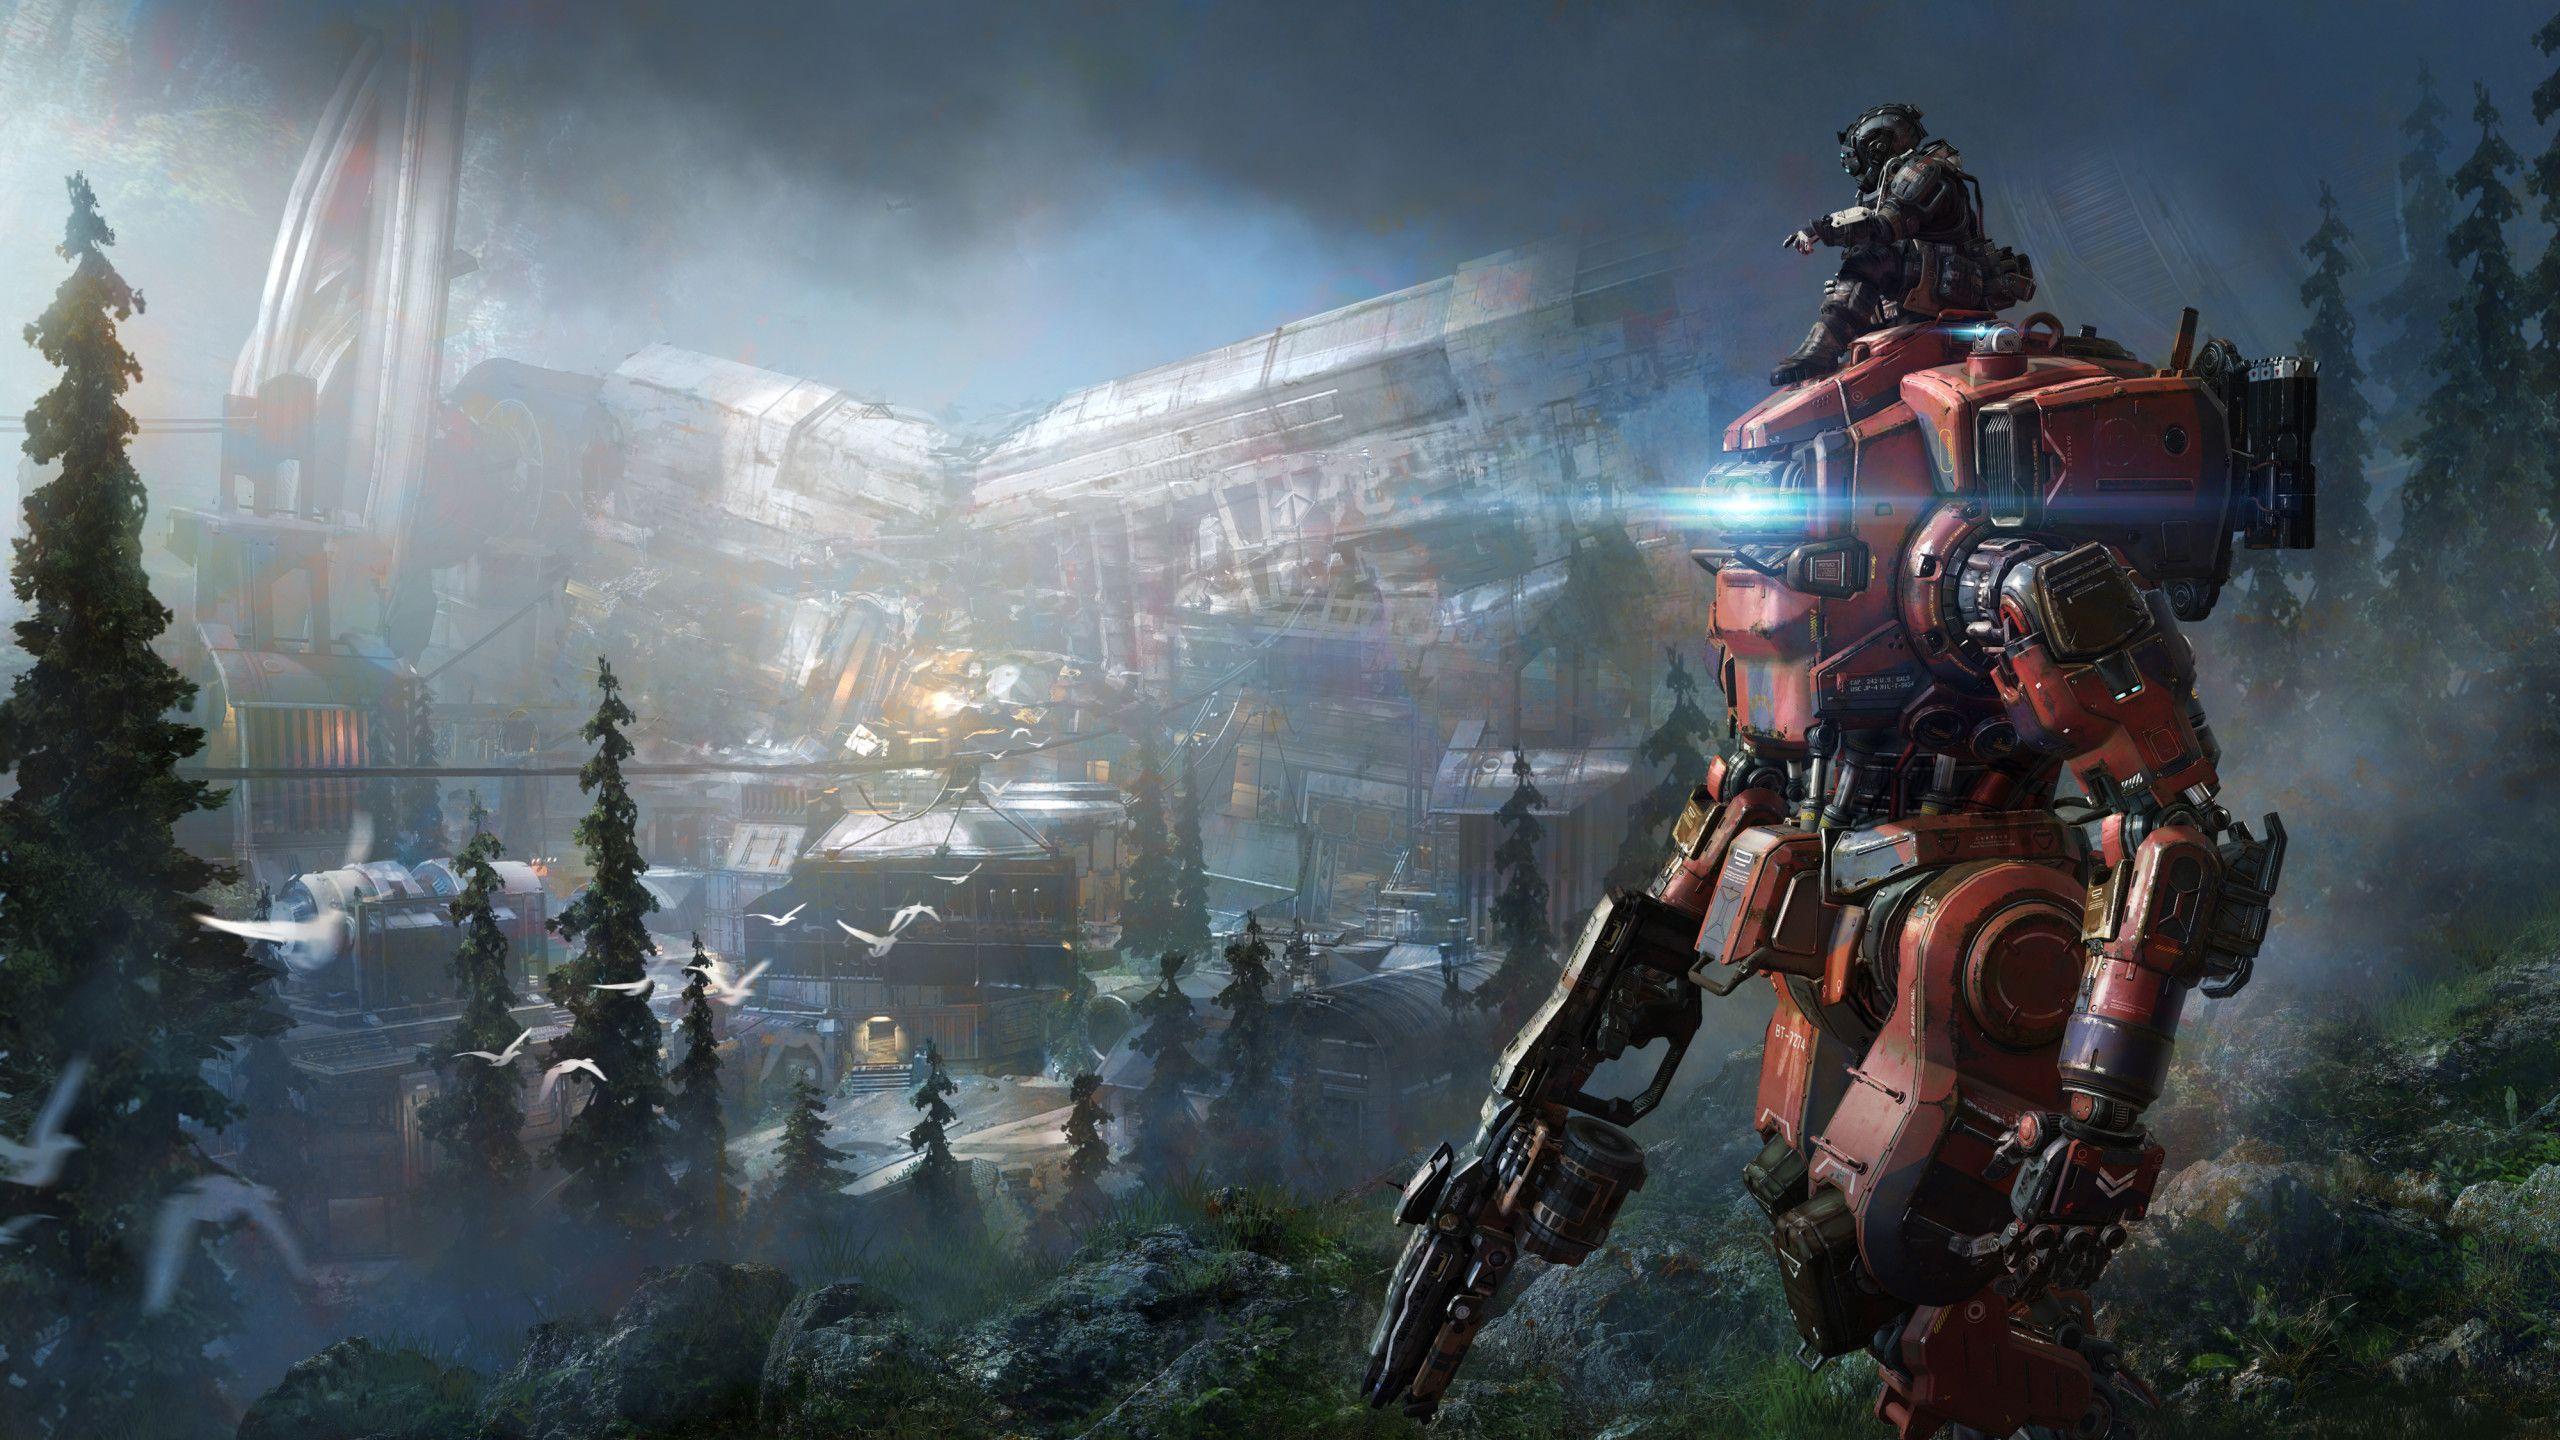 Video Game Titanfall 2 4k Ultra HD Wallpaper by Rookie425